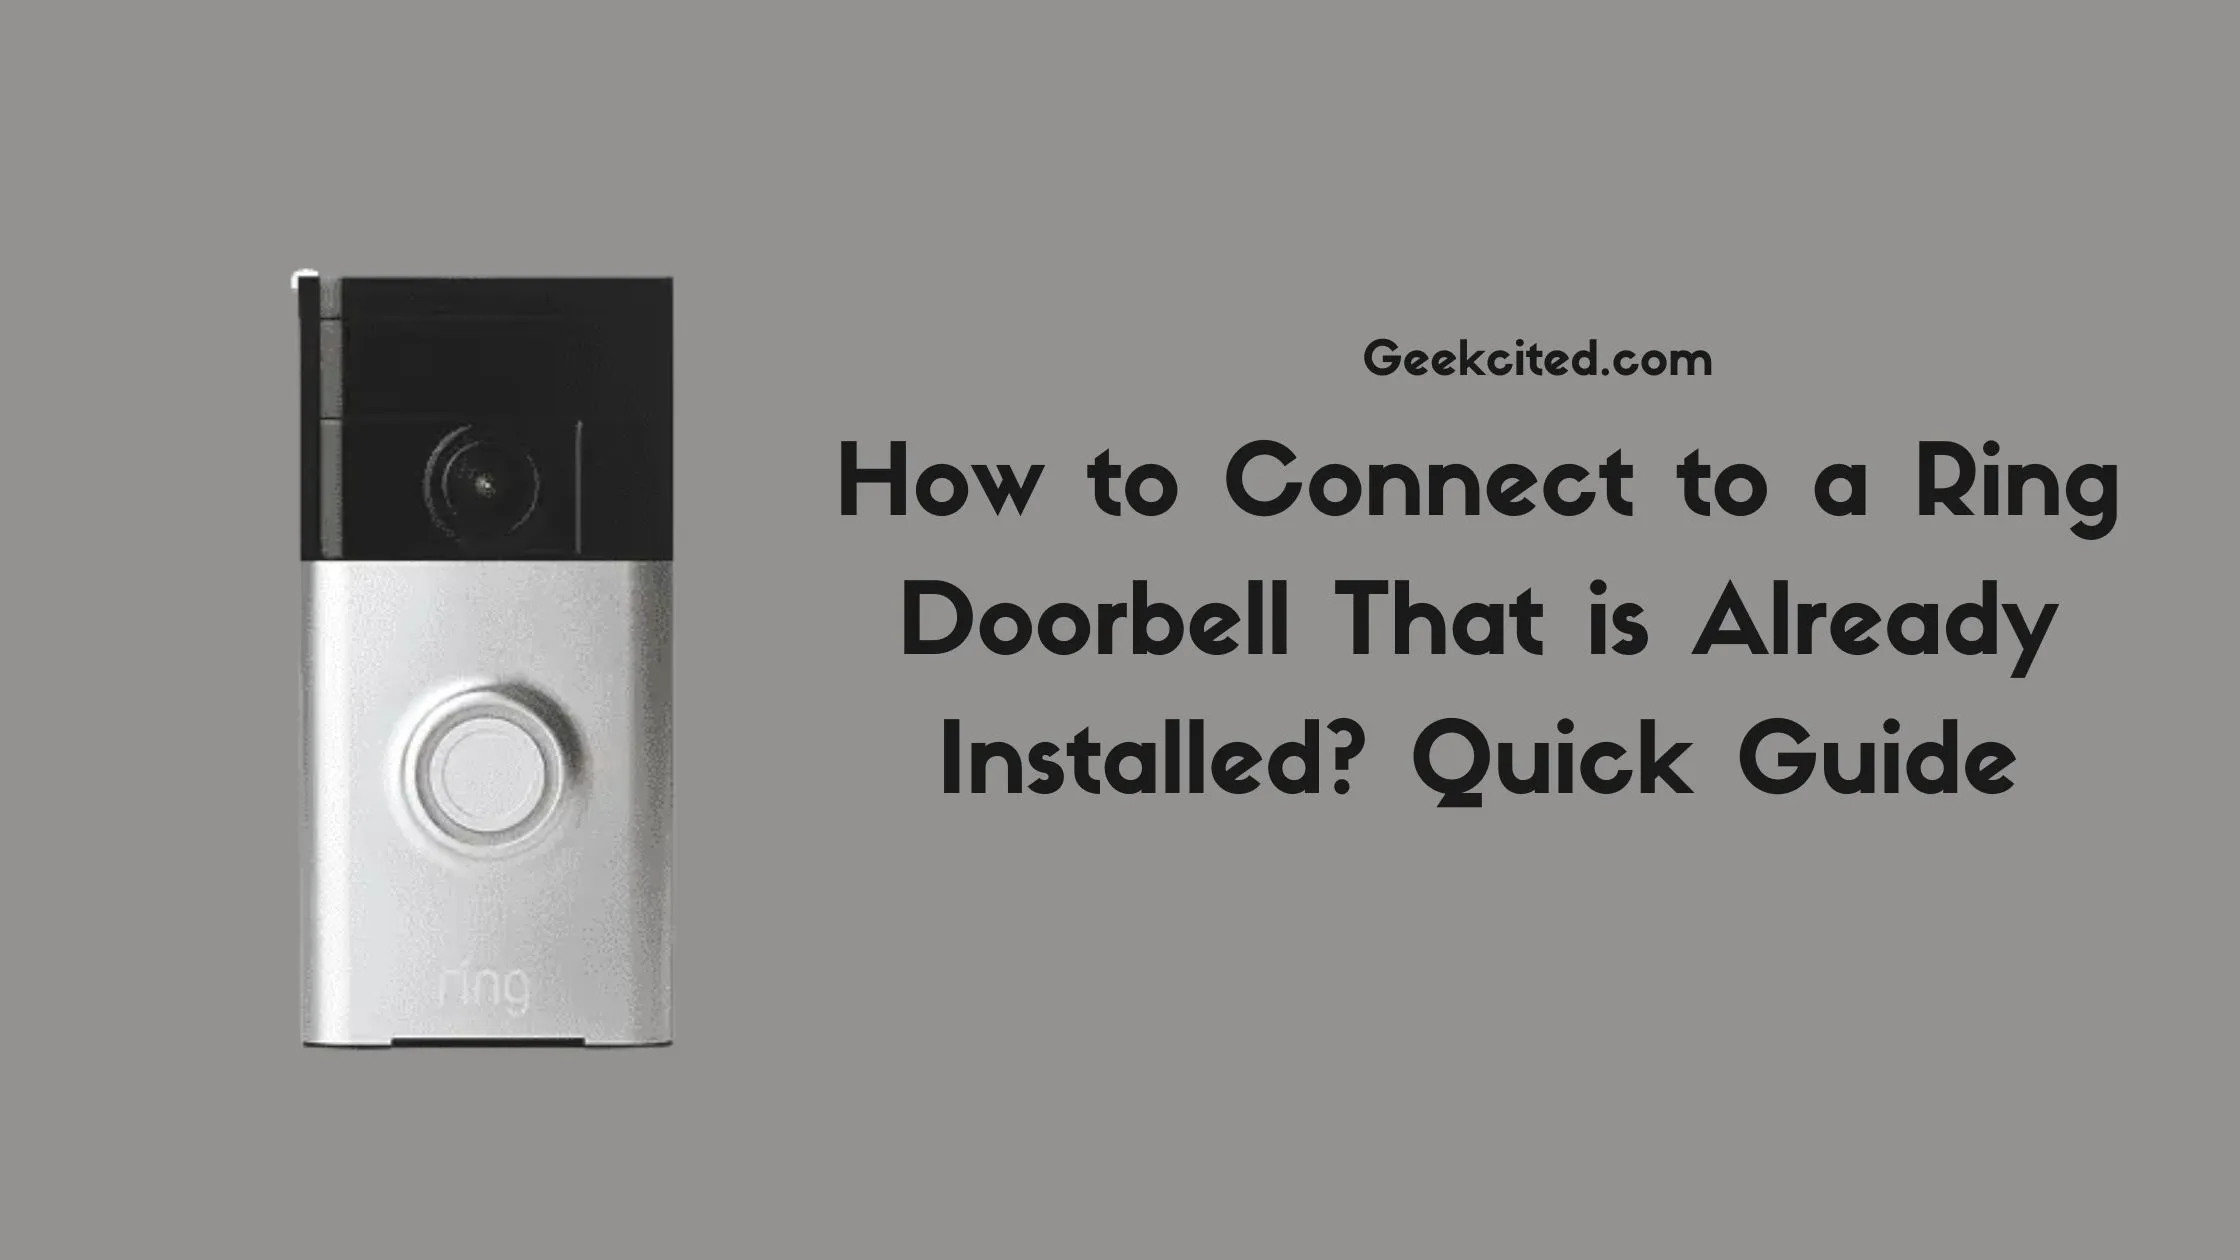 How to Connect to a Ring Doorbell That is Already Installed Quick Guide